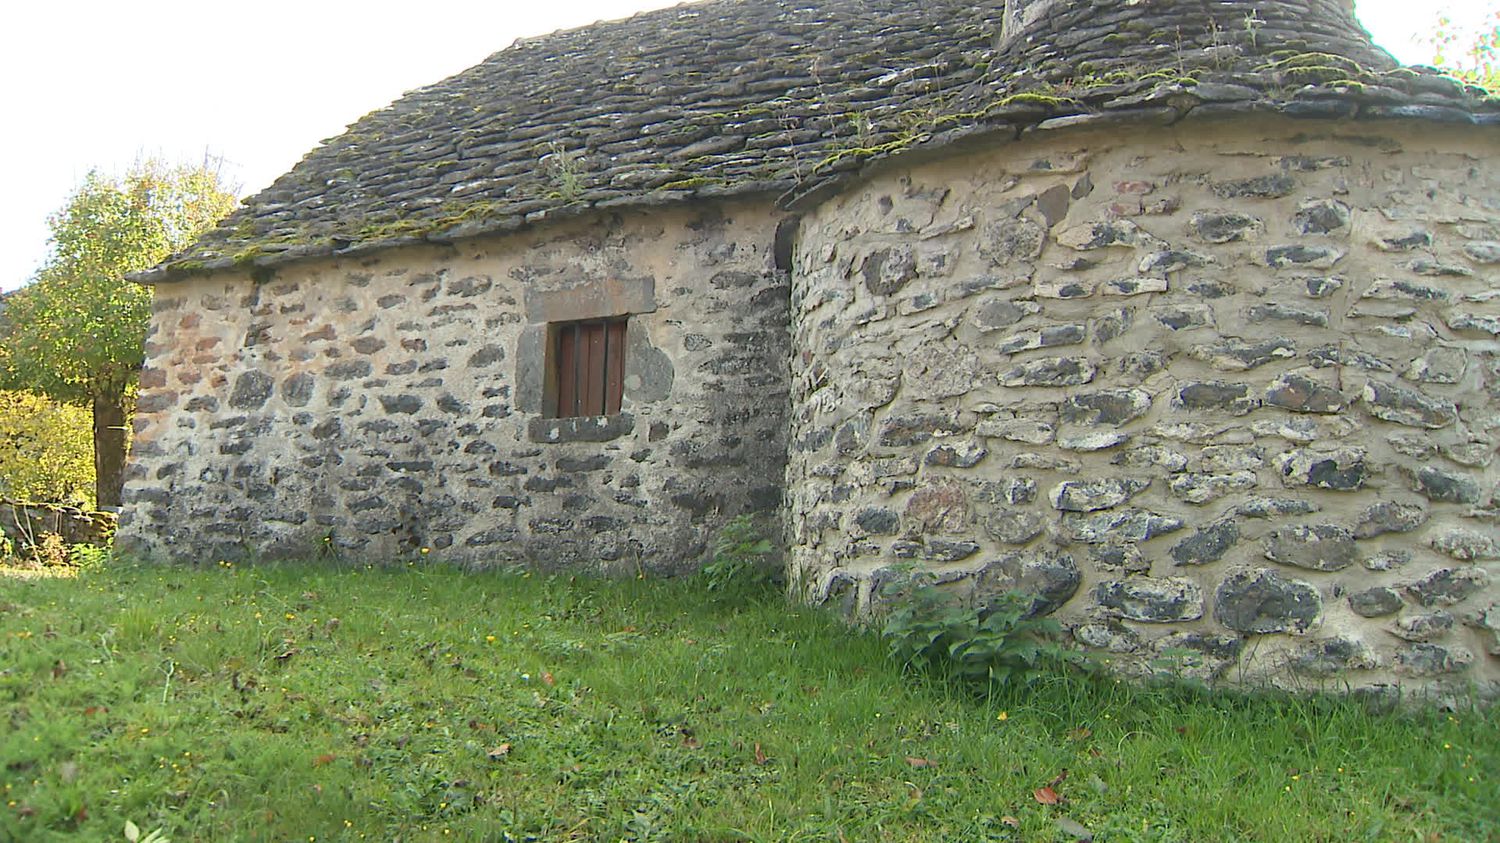 In Cantal, baking ovens are discovered in the past thanks to virtual reality